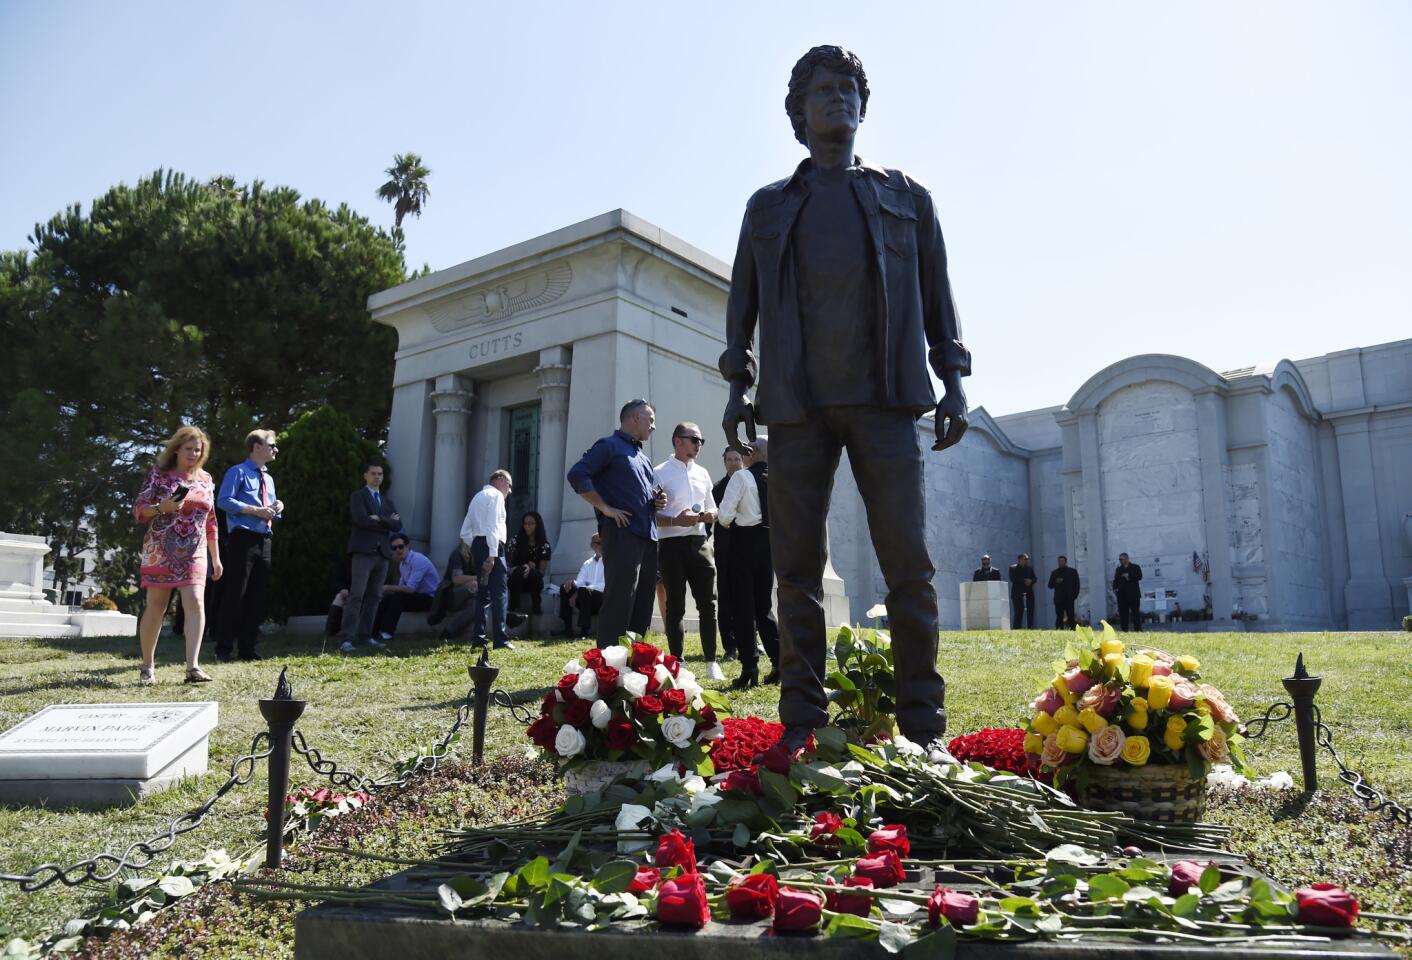 Guests gather around a statue of the late actor Anton Yelchin during a life celebration and statue unveiling for Yelchin at Hollywood Forever Cemetery in Los Angeles. Yelchin died in June 2016 at the age of 27.